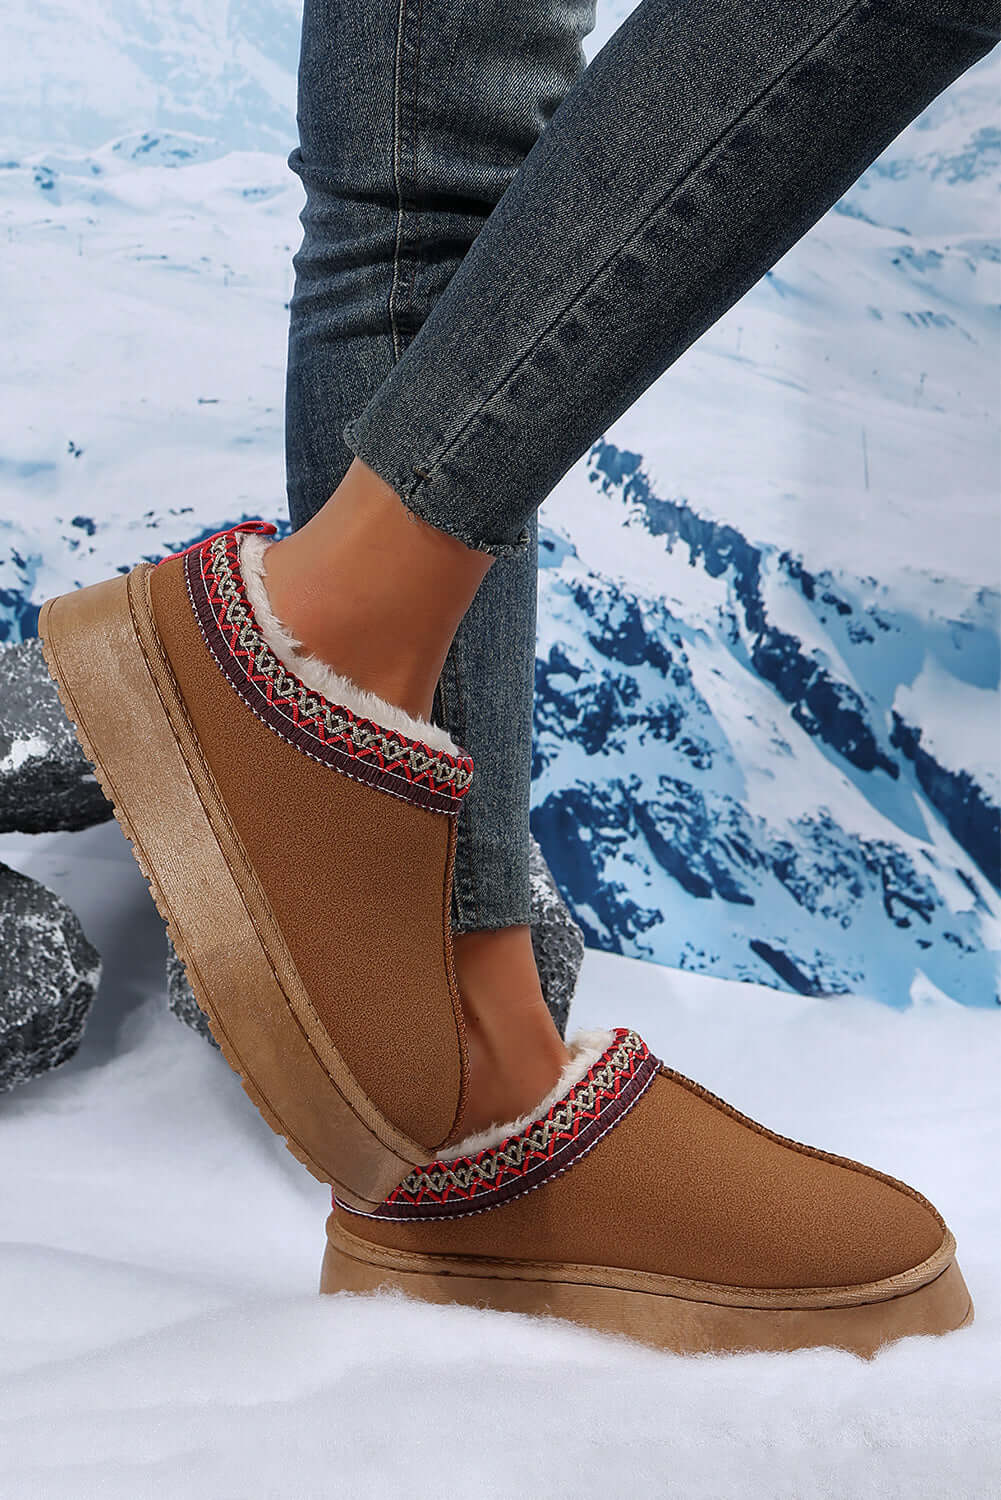 Chestnut Suede Contrast Print Plush Lined Snow Boots - Dixie Hike & Style